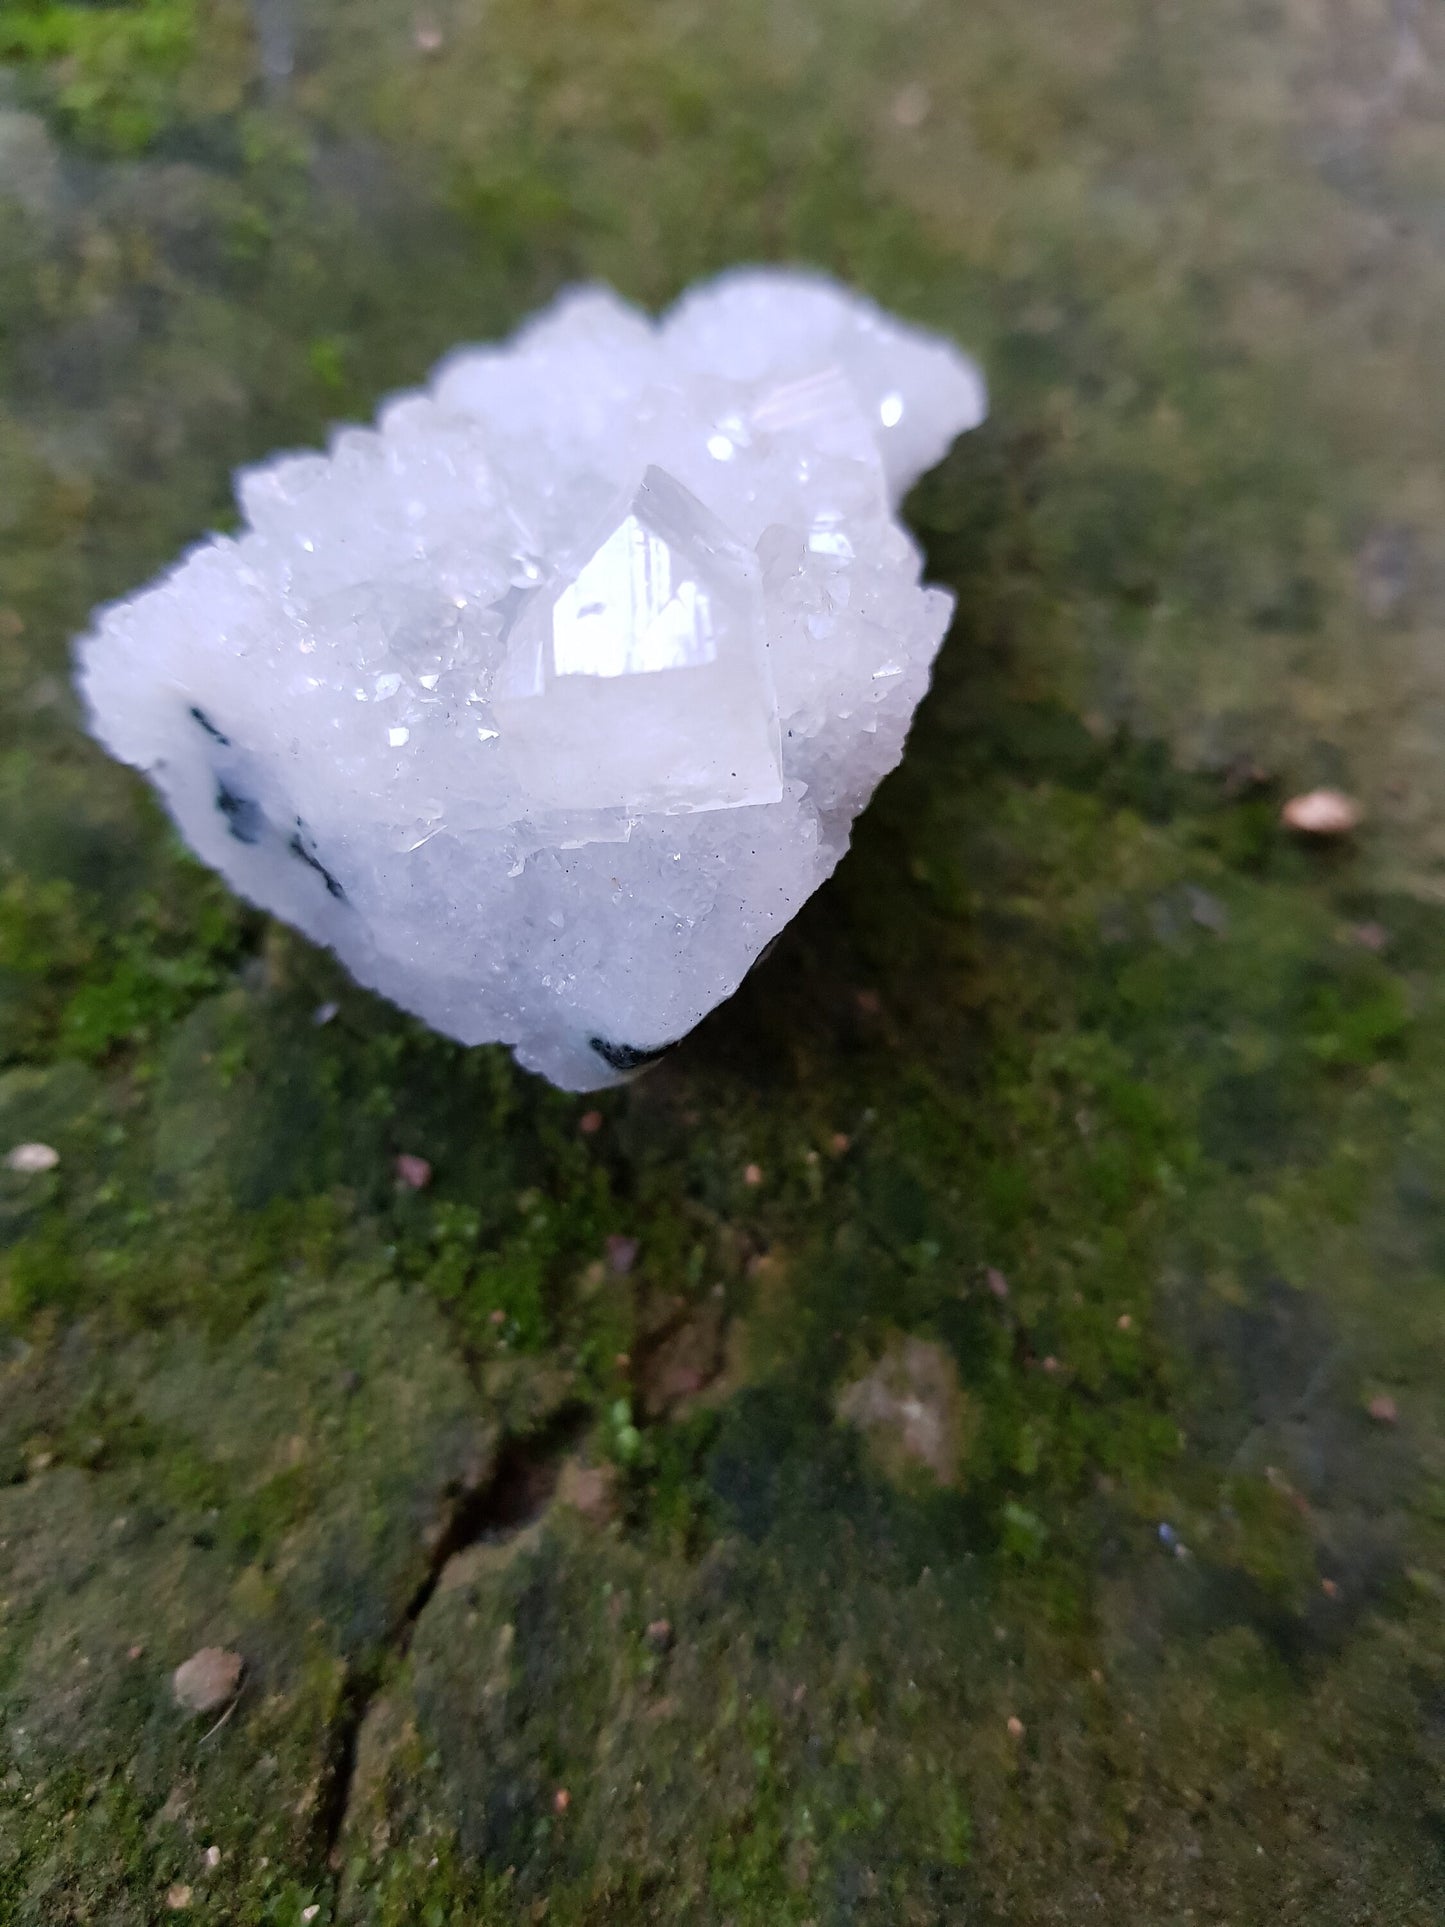 Small Natural Apophylite Crystal Cluster, Healing Crystal, Mineral Specimen, Mineral Collection